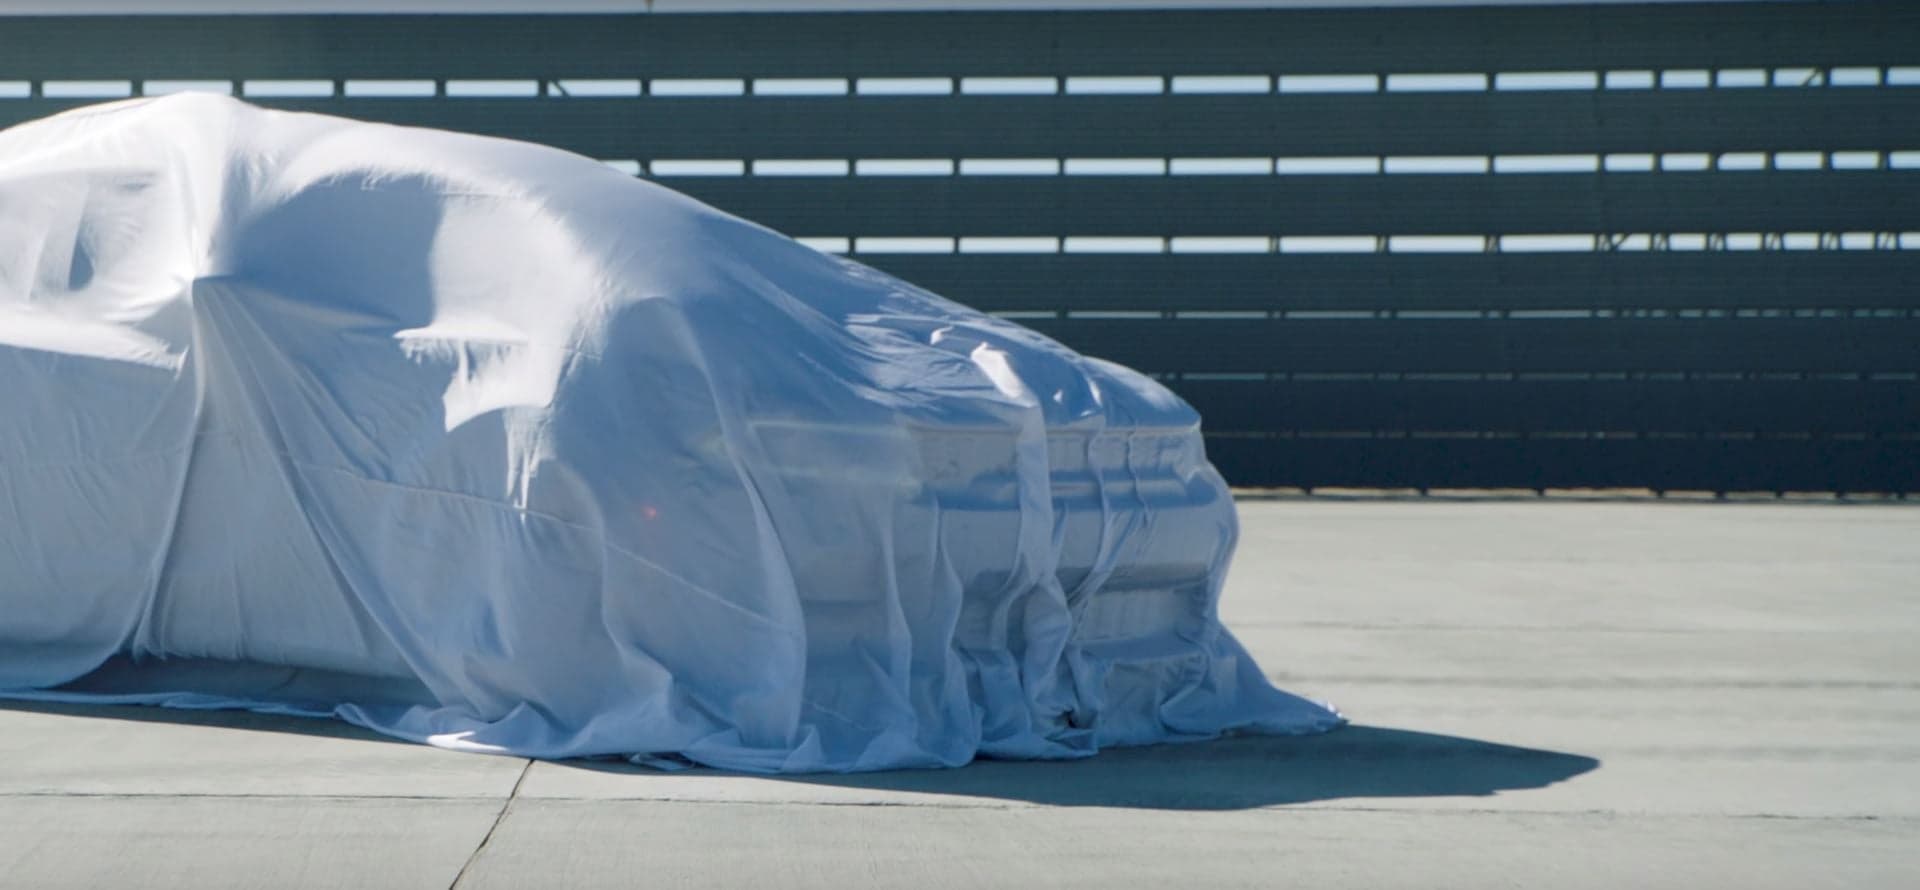 Teaser Video Hints the Dodge Charger Hellcat Widebody Is Imminent